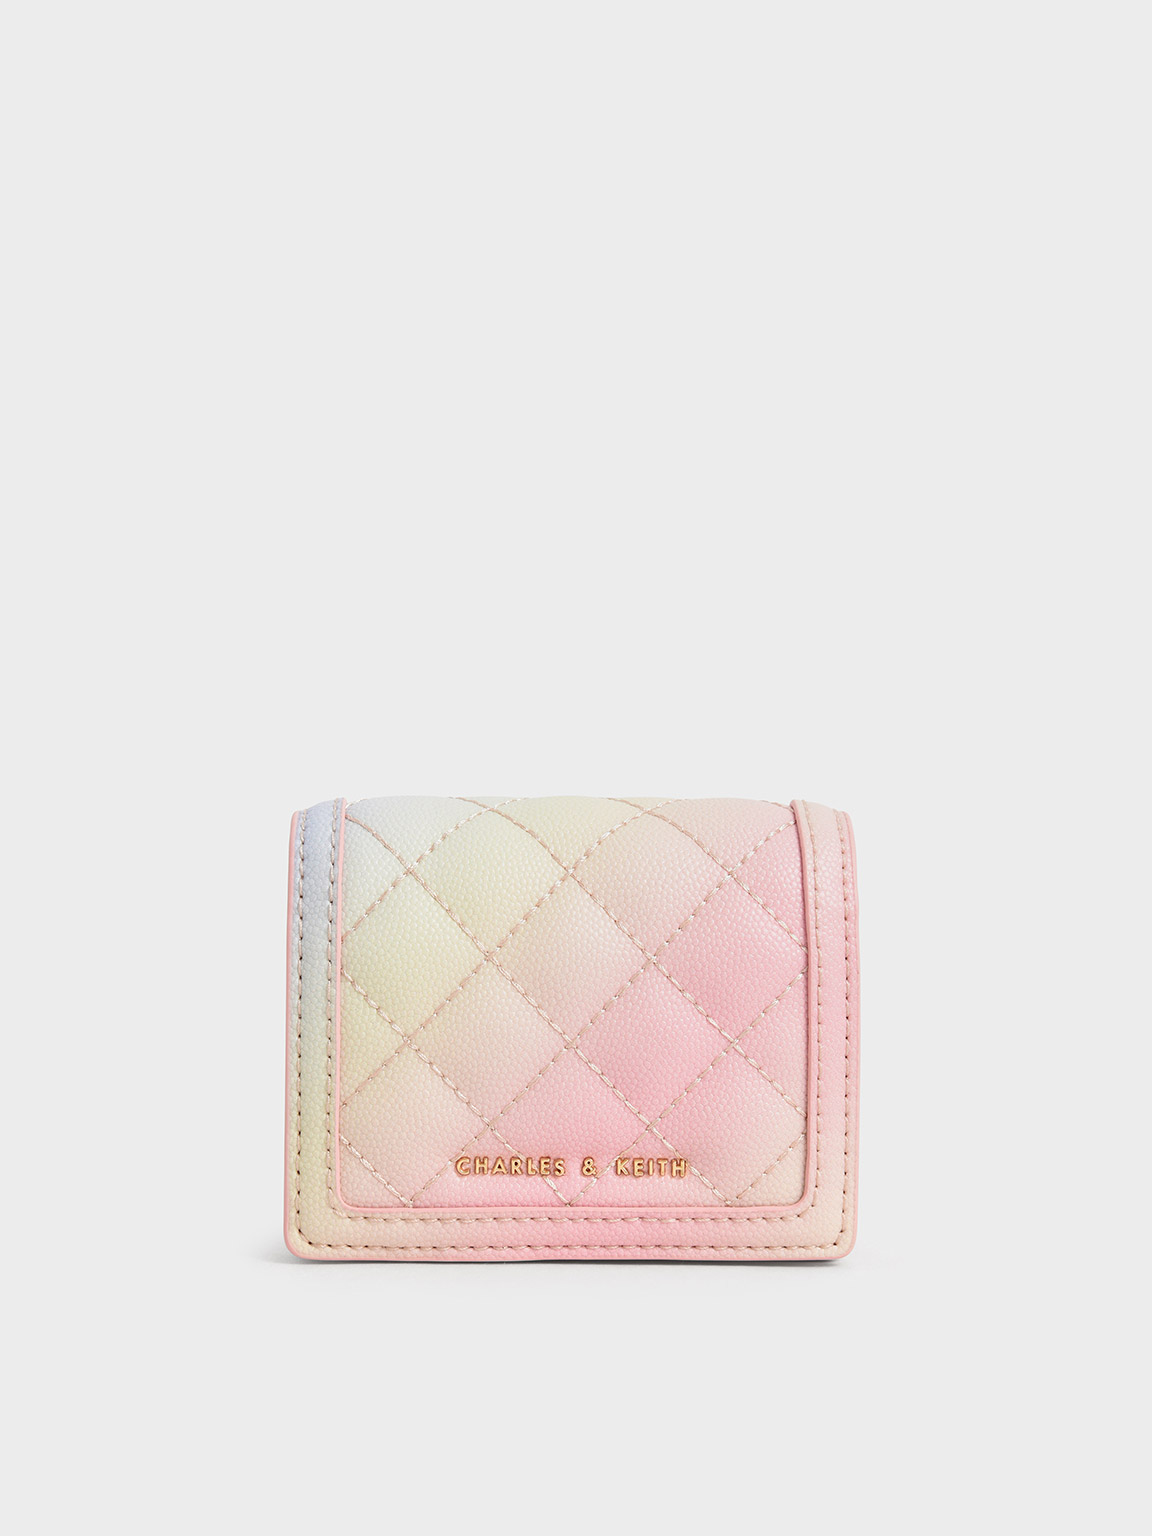 Download Standing Out from the Crowd with Louis Vuitton Pink